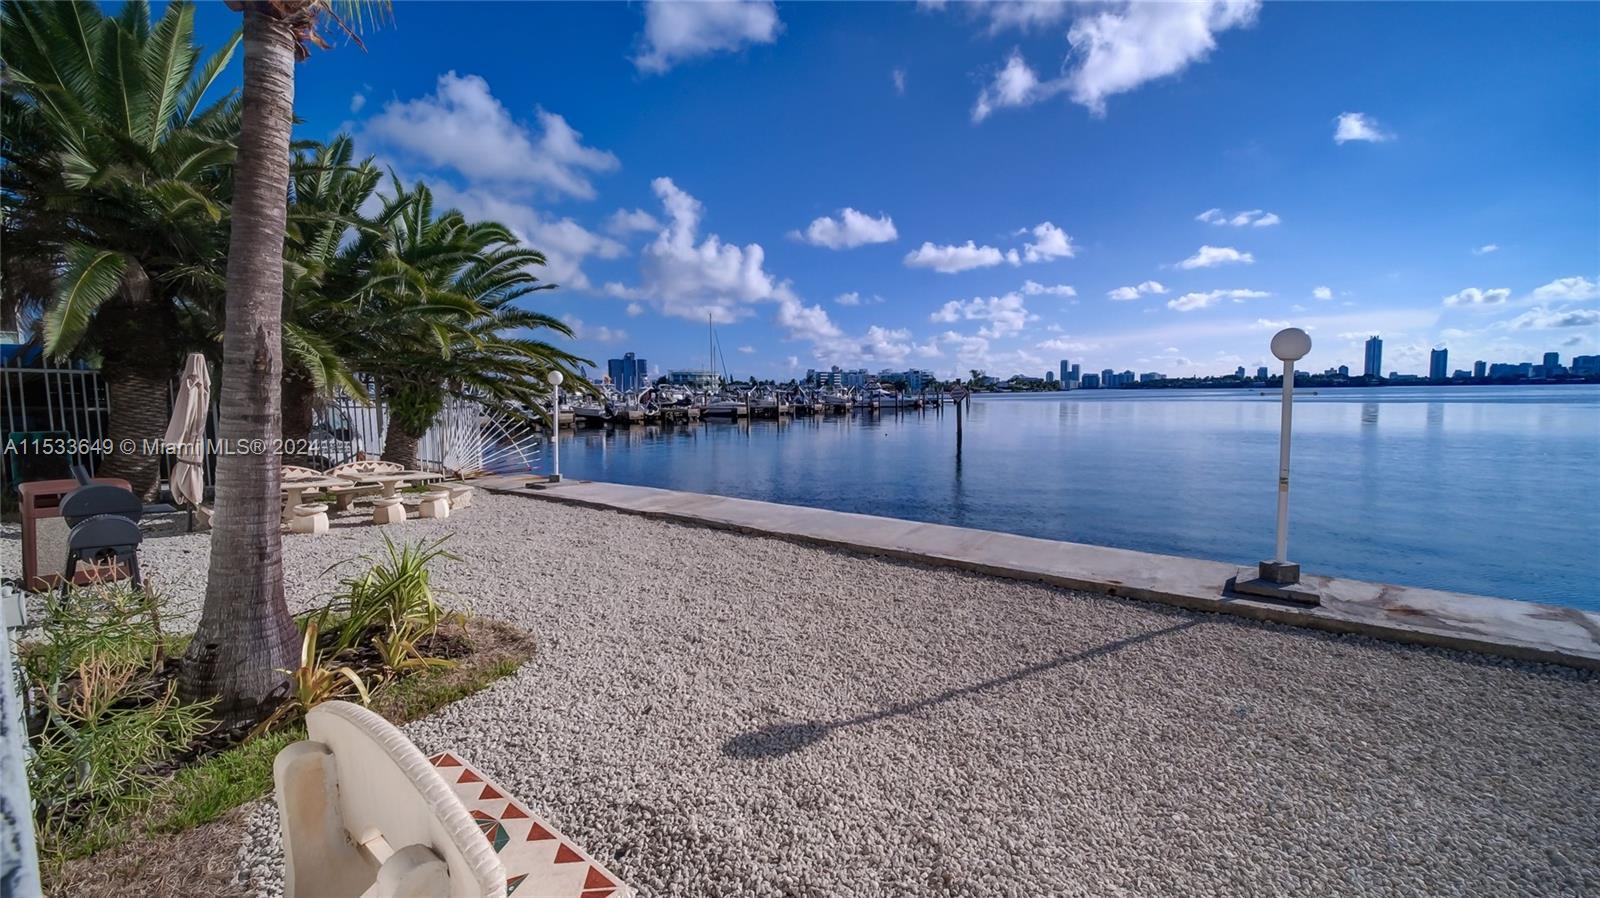 Turnkey 2-bed/2-bath condominium with partial bay views. This renovated unit located in the much sou